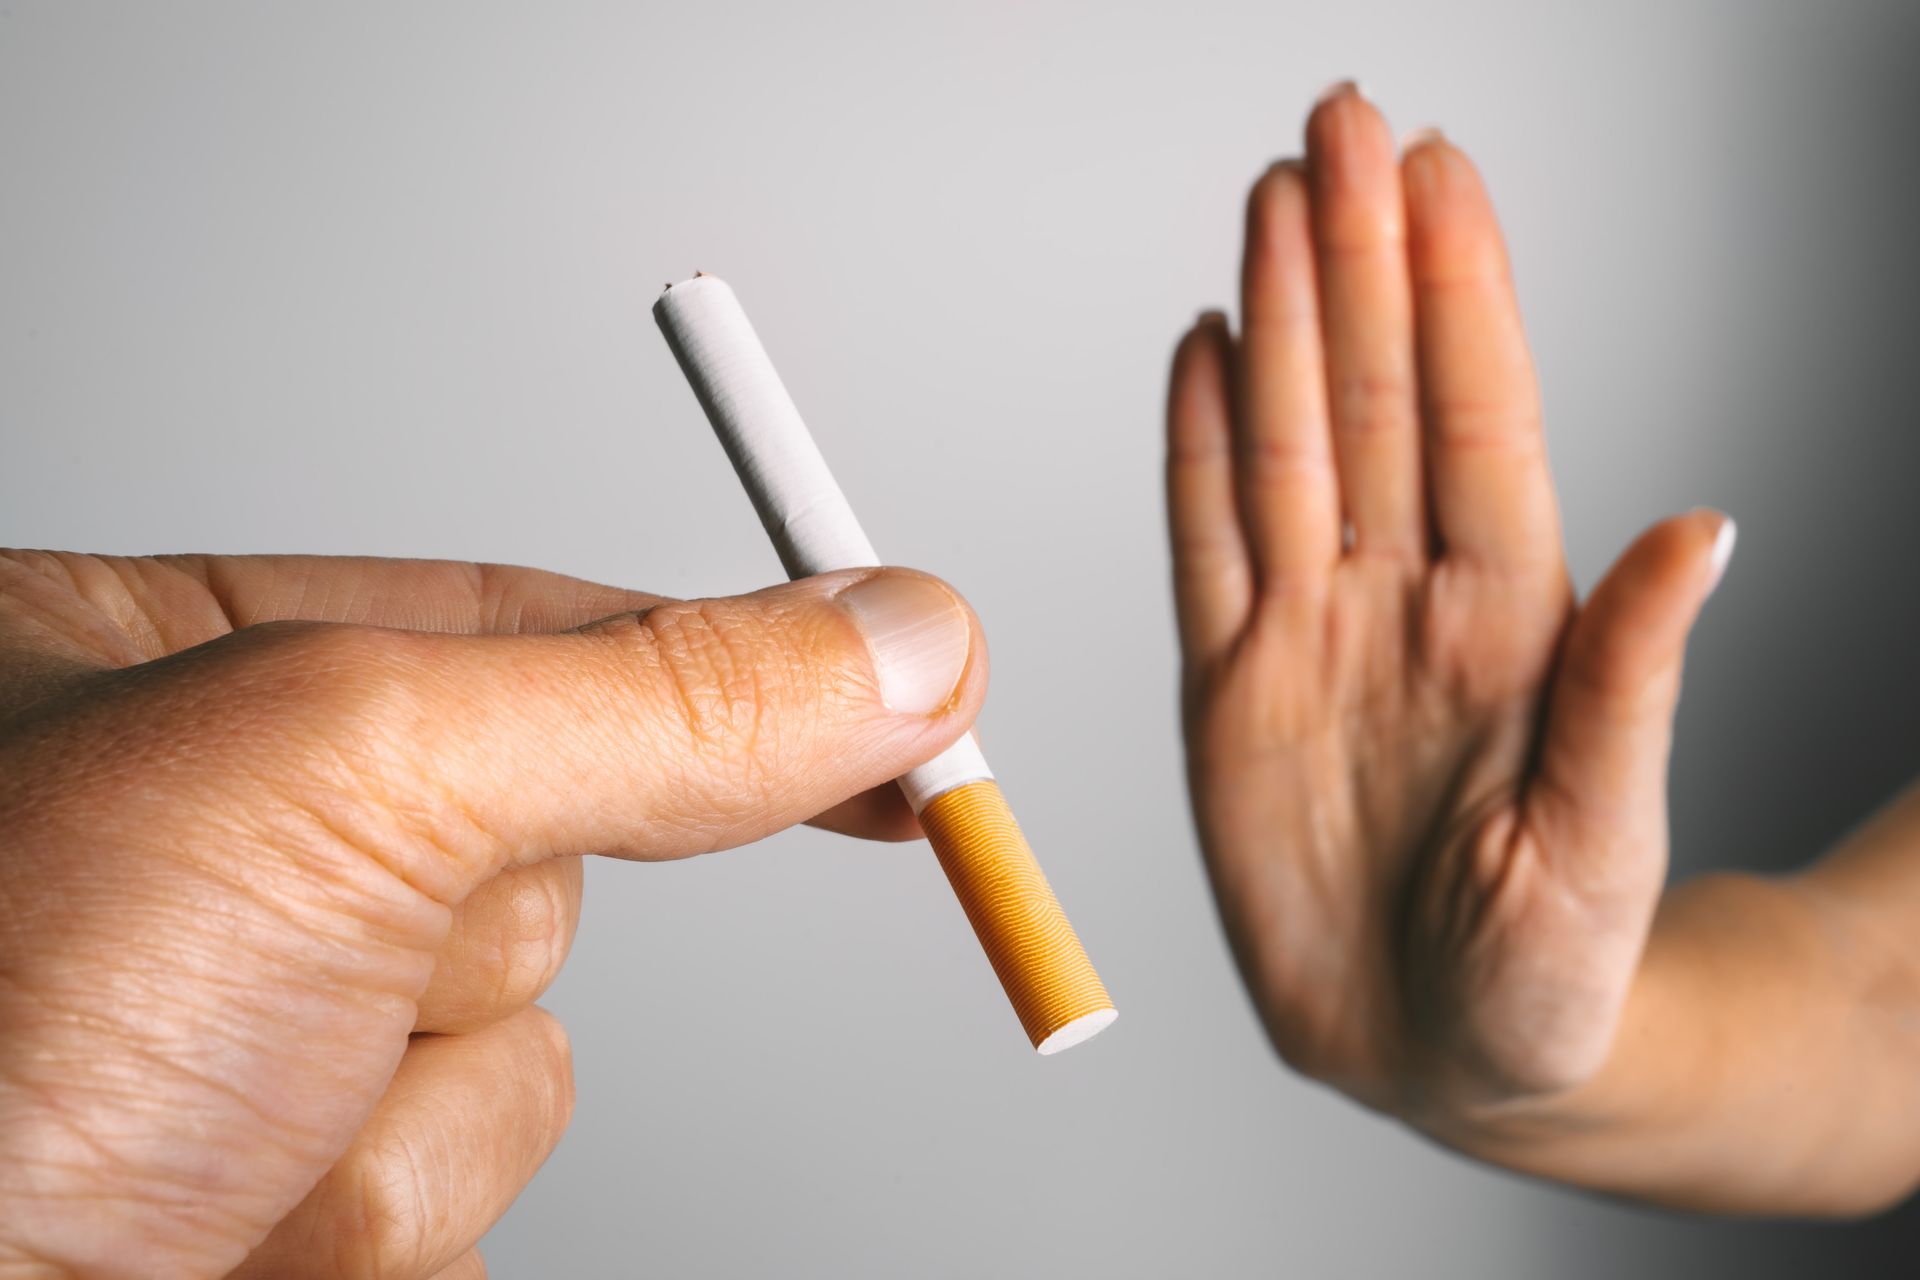 A hand is held up in front of a cigarette